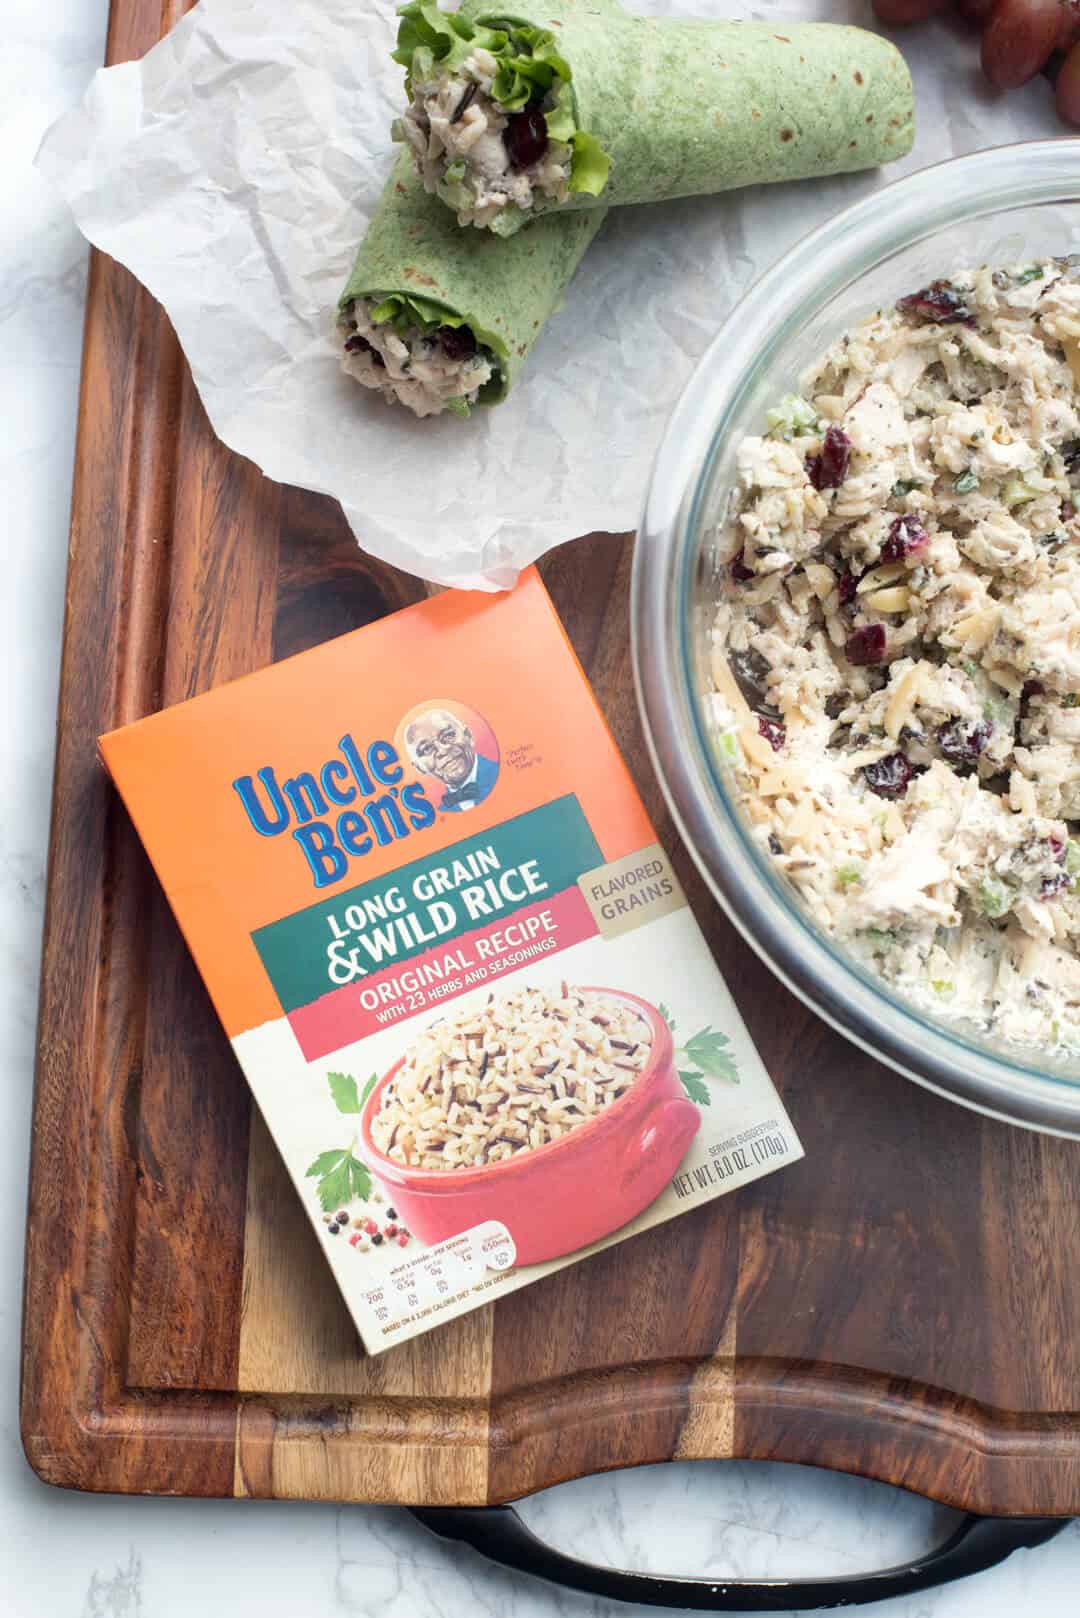 A wrap next to a bowl of chicken salad and a box of Uncle Ben's Long Grain and Wild Rice.